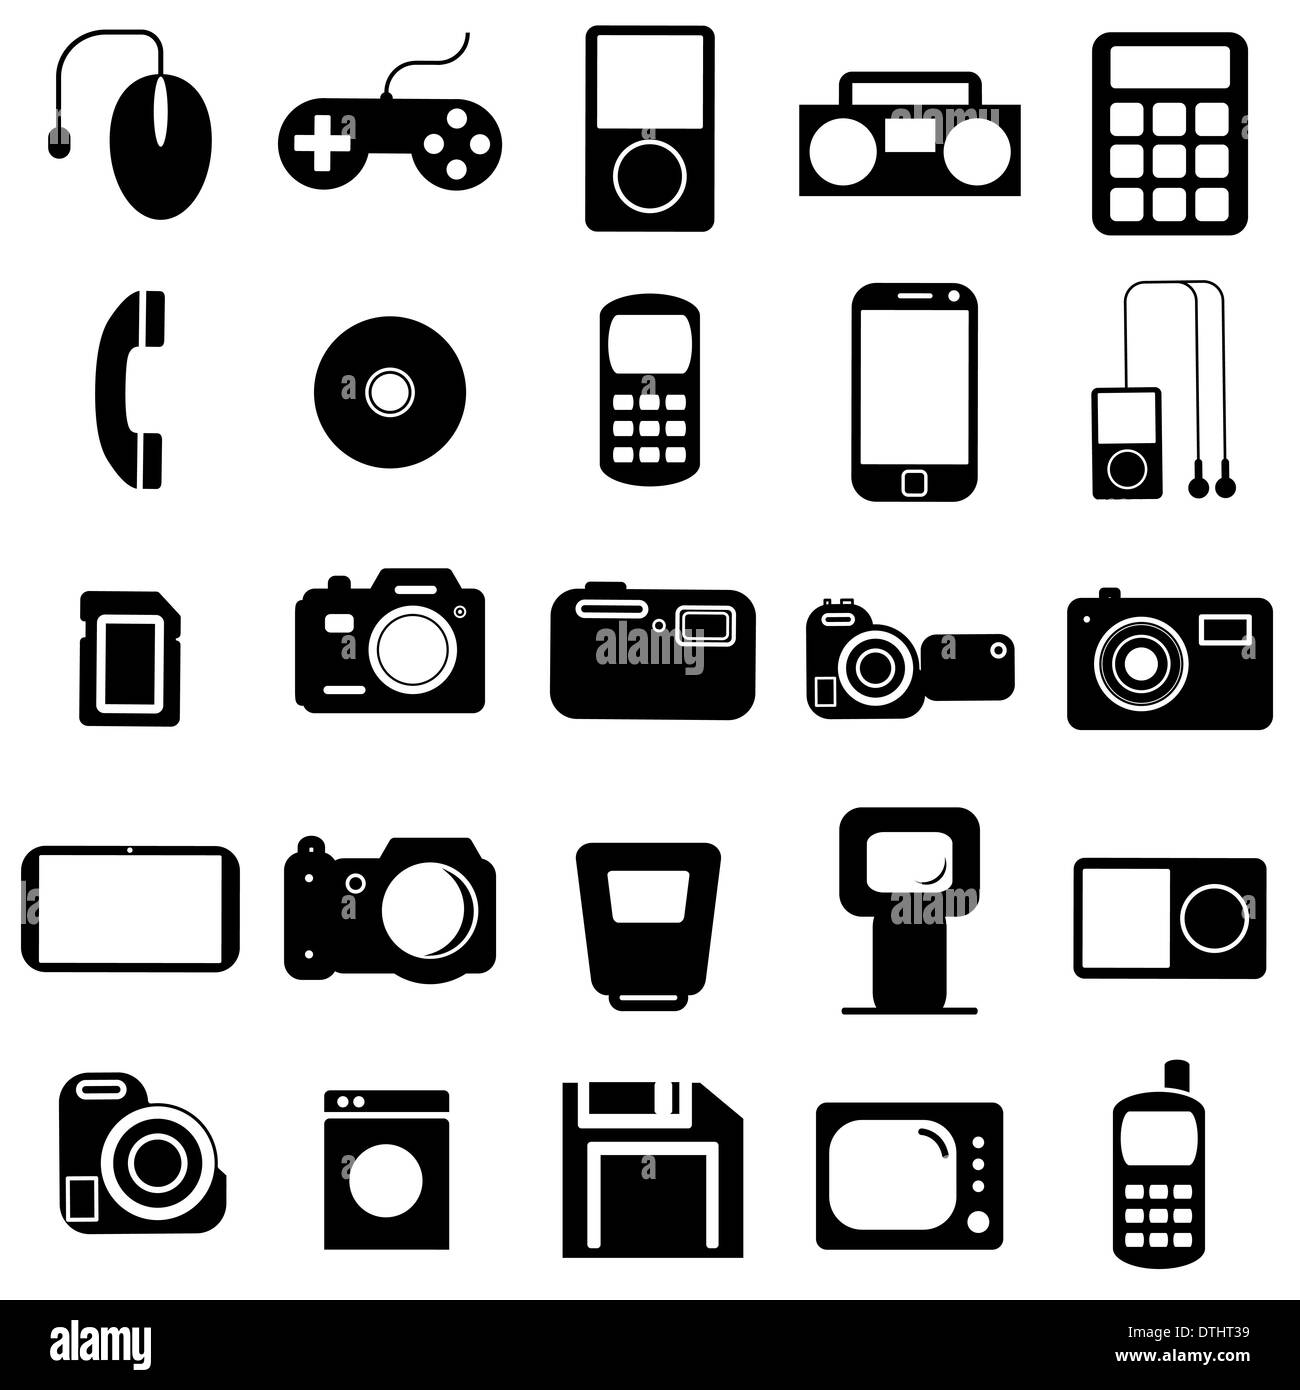 Collection flat icons. Multimedia symbols. Vector illustration. Stock Photo